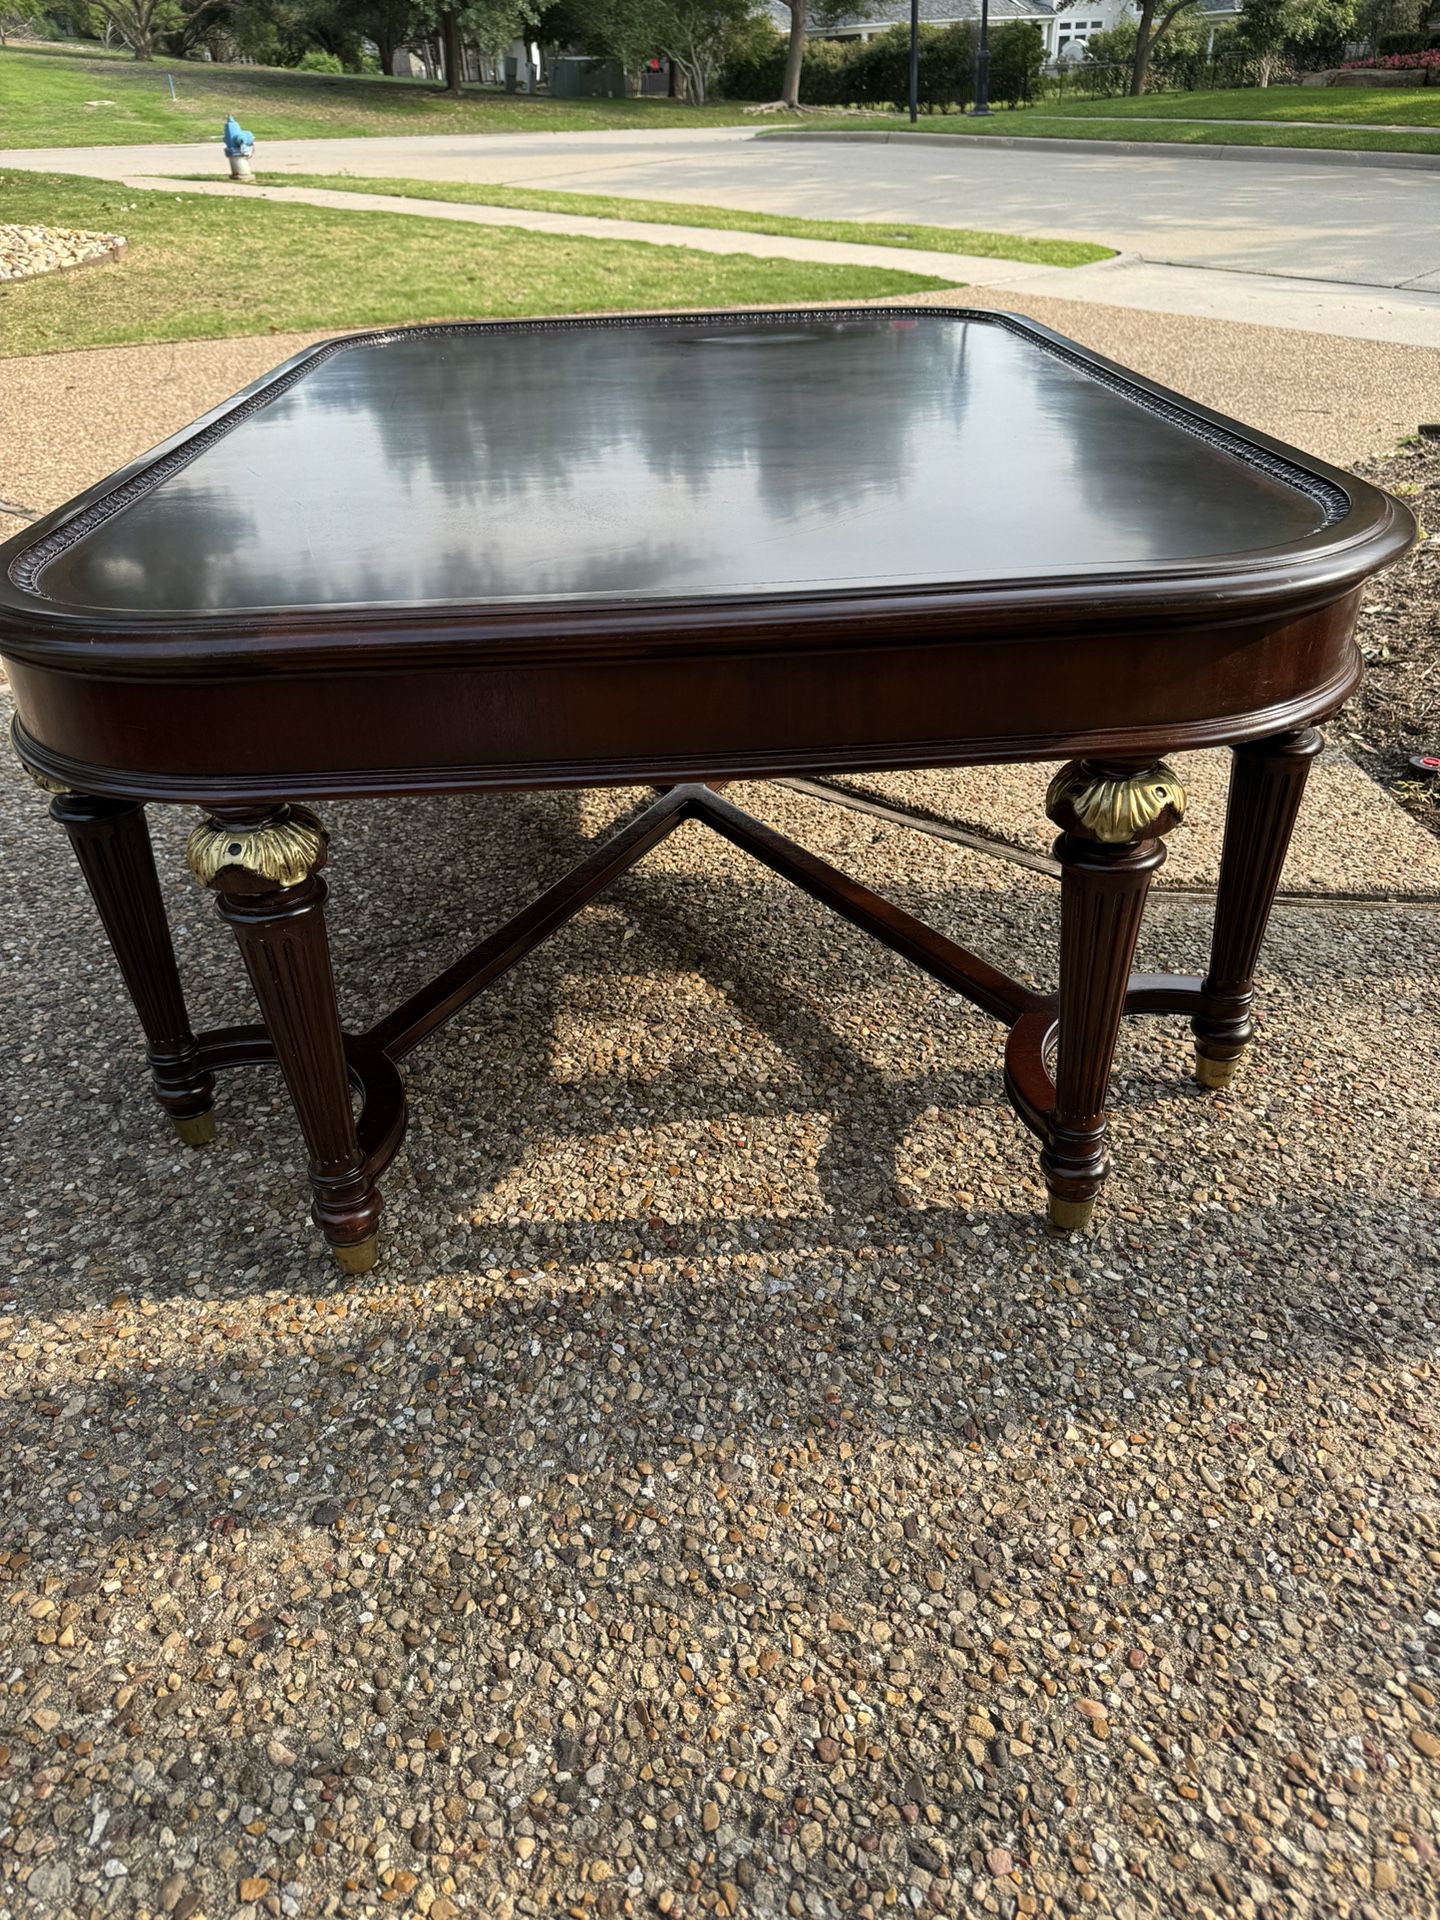 Thomasville Brompton Hall Rectangular Cocktail Table - Great Condition!